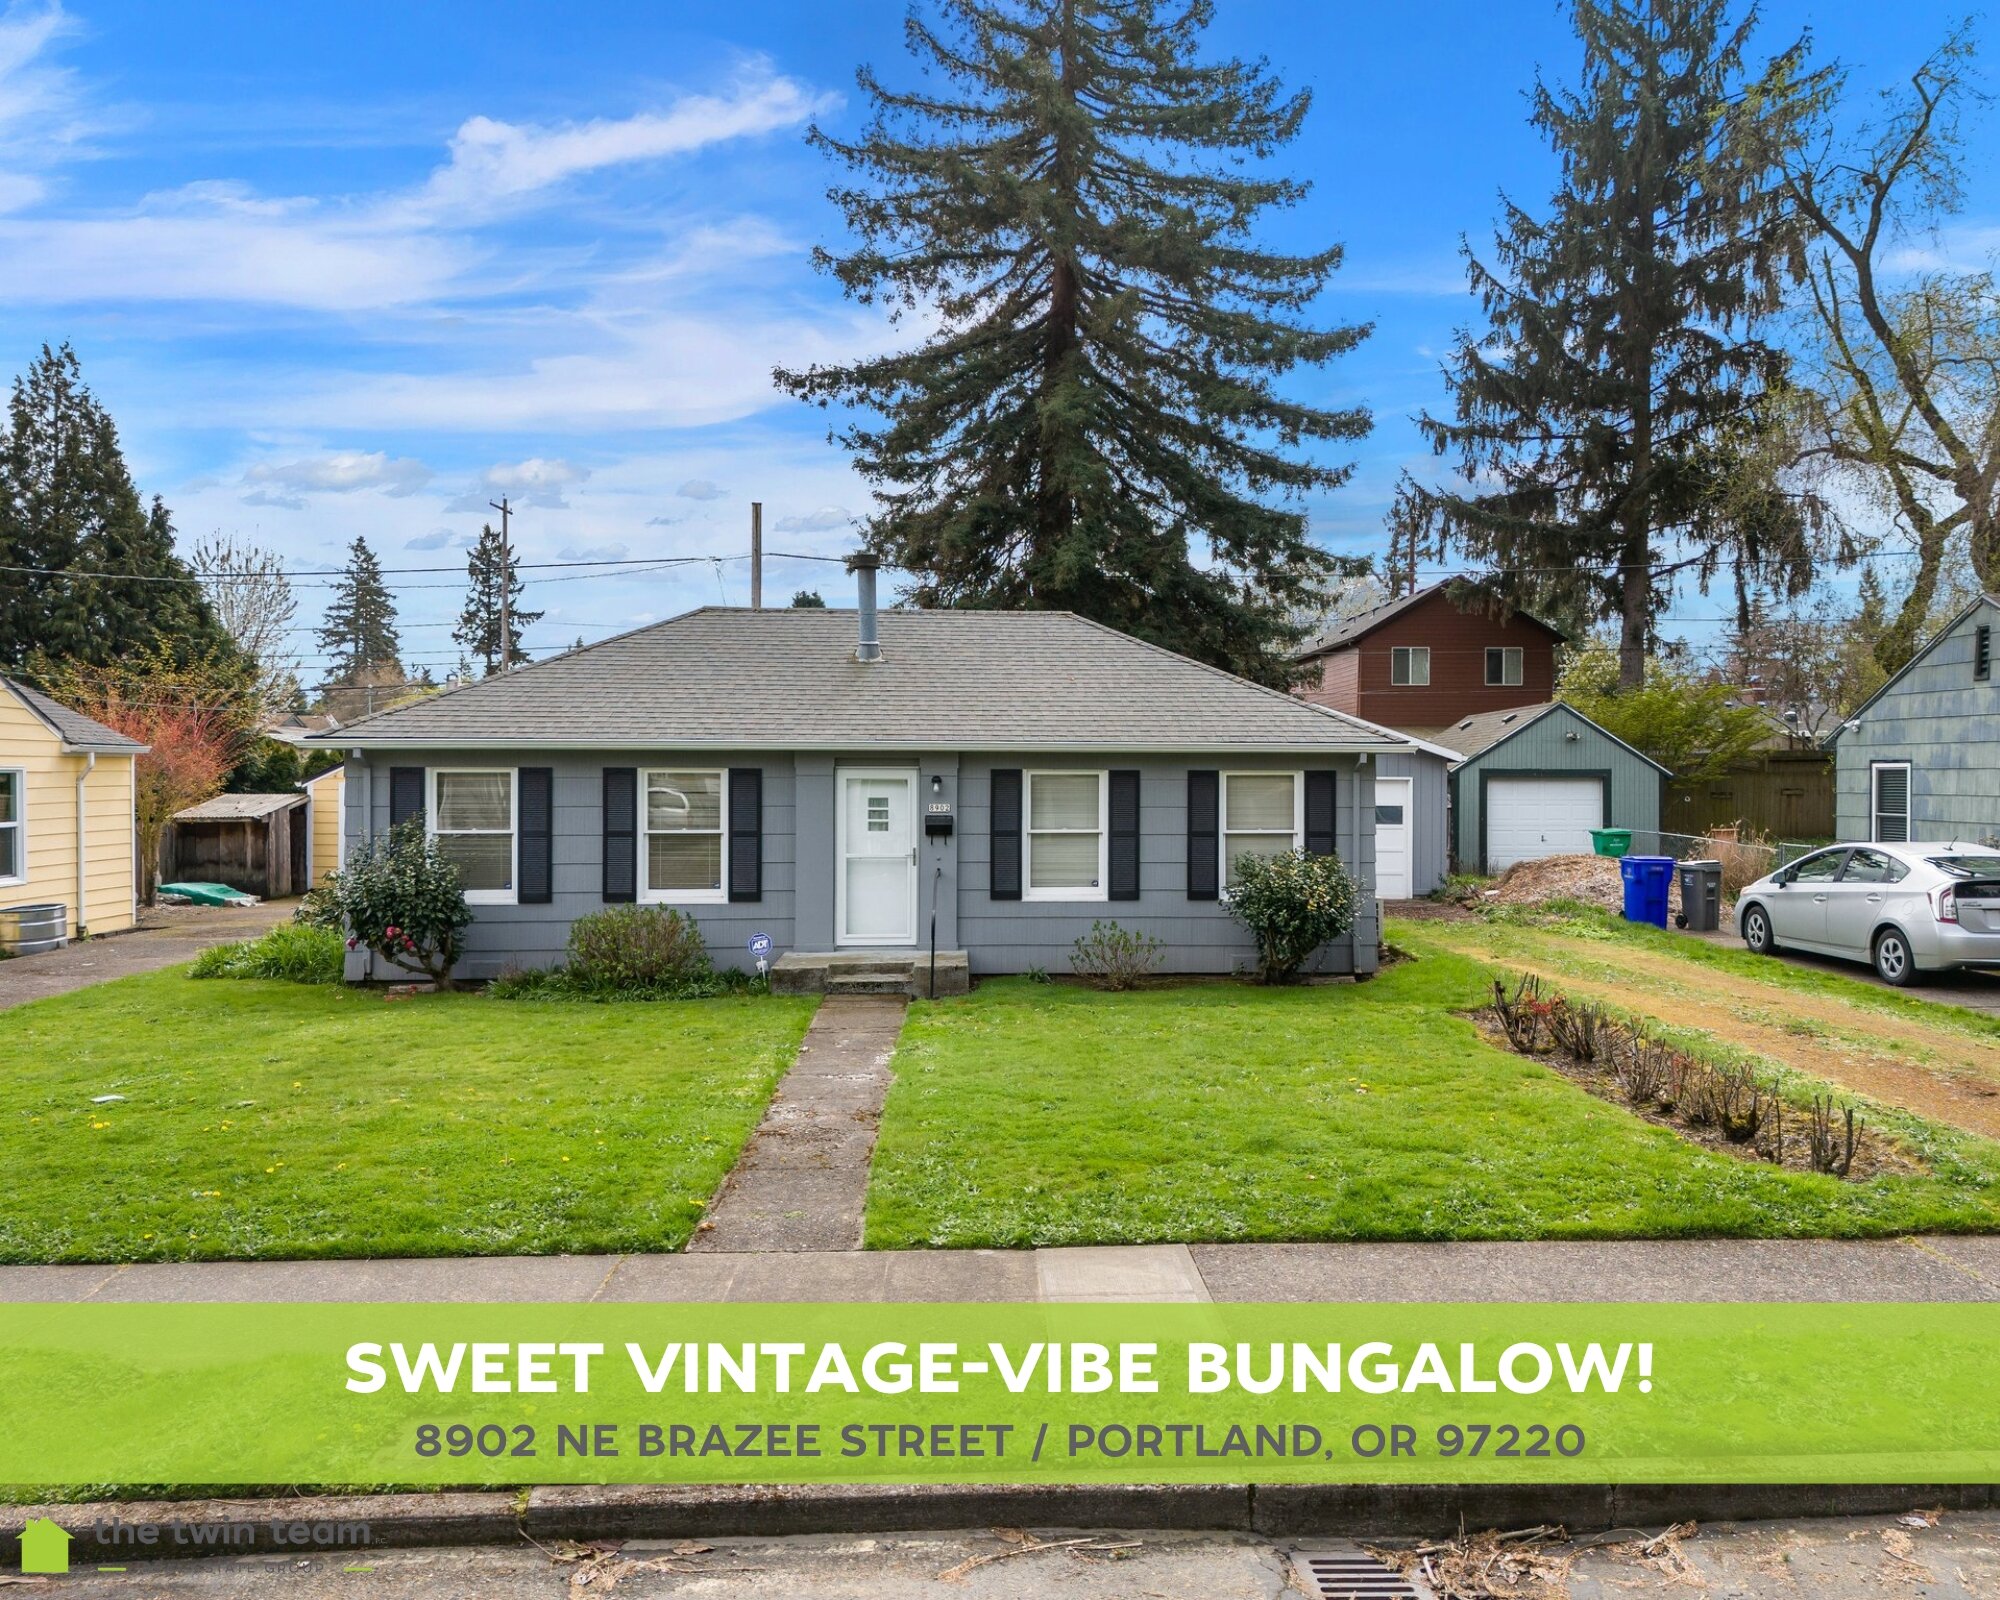 JUST LISTED!!
📍8902 NE Brazee Street, Portland, OR 97220
🛏 2 Beds
🛁 1 Baths
📐 836 Sq Ft
💰 $309,900

Welcome to this sweet ~vintage-vibe~ bungalow in sought-after Rocky Butte/Madison neighborhood! Opportunity awaits! This charming cosmetic fixer 